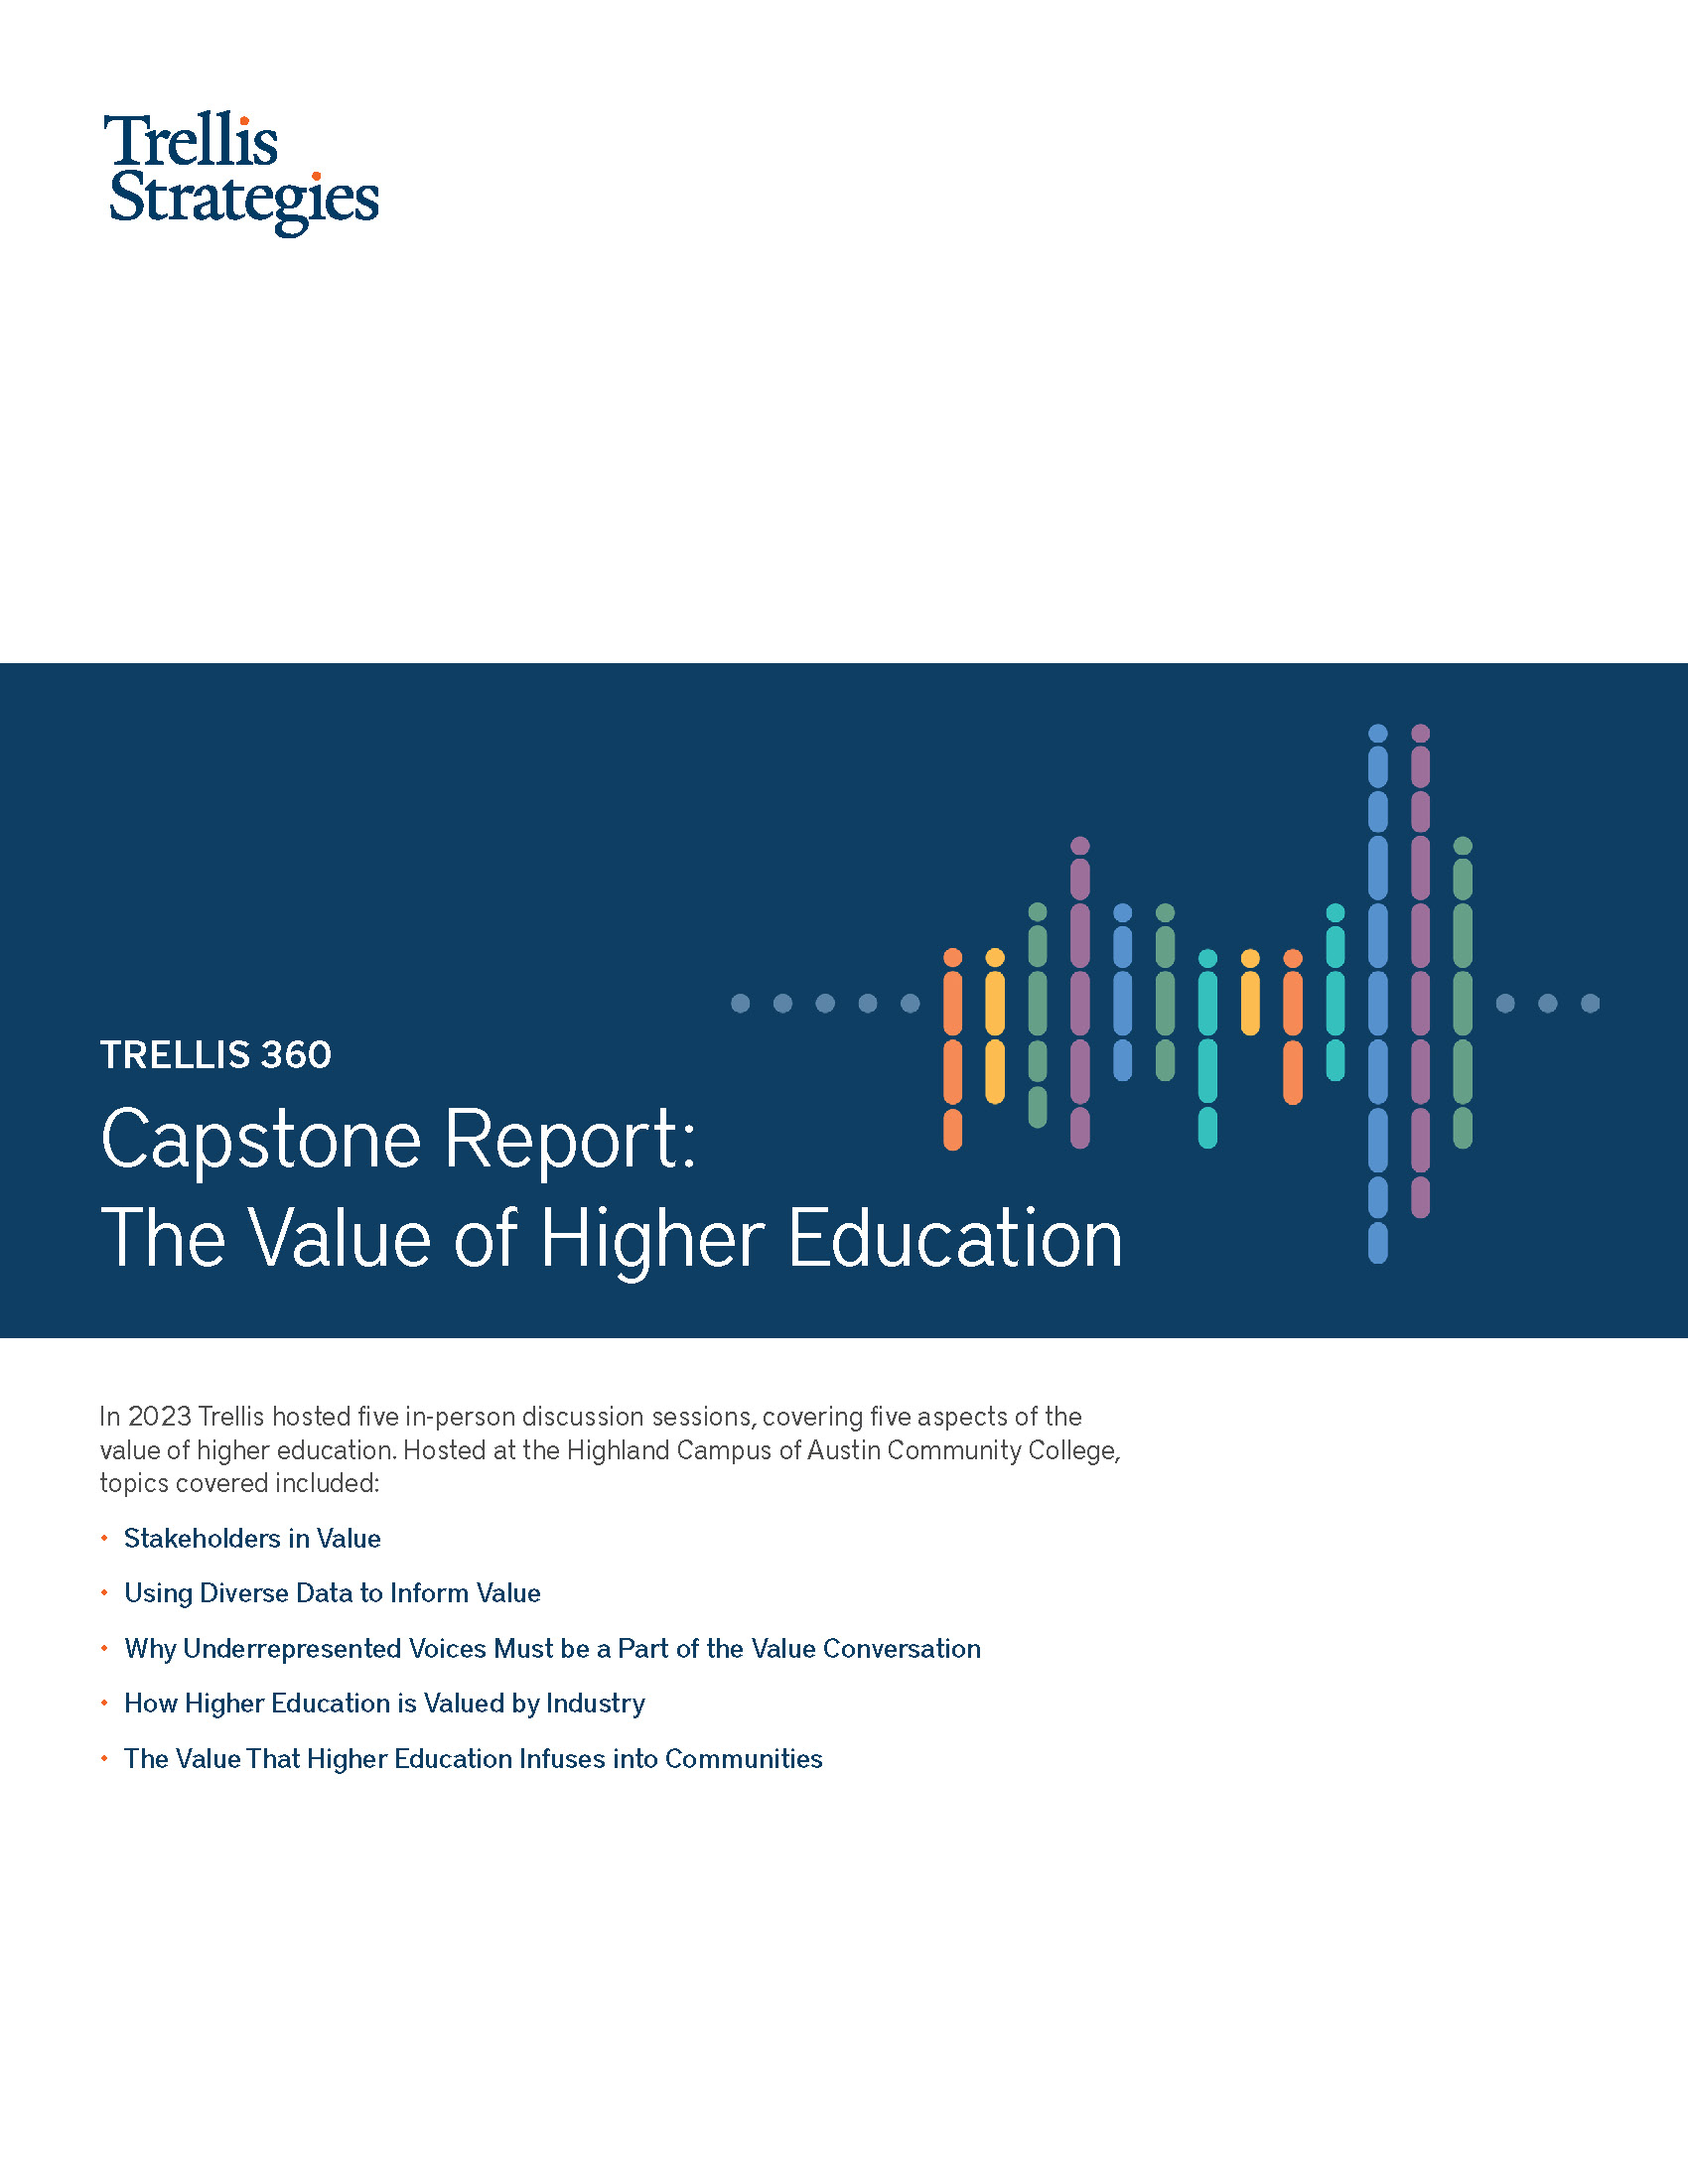 Capstone Report: The Value of Higher Education